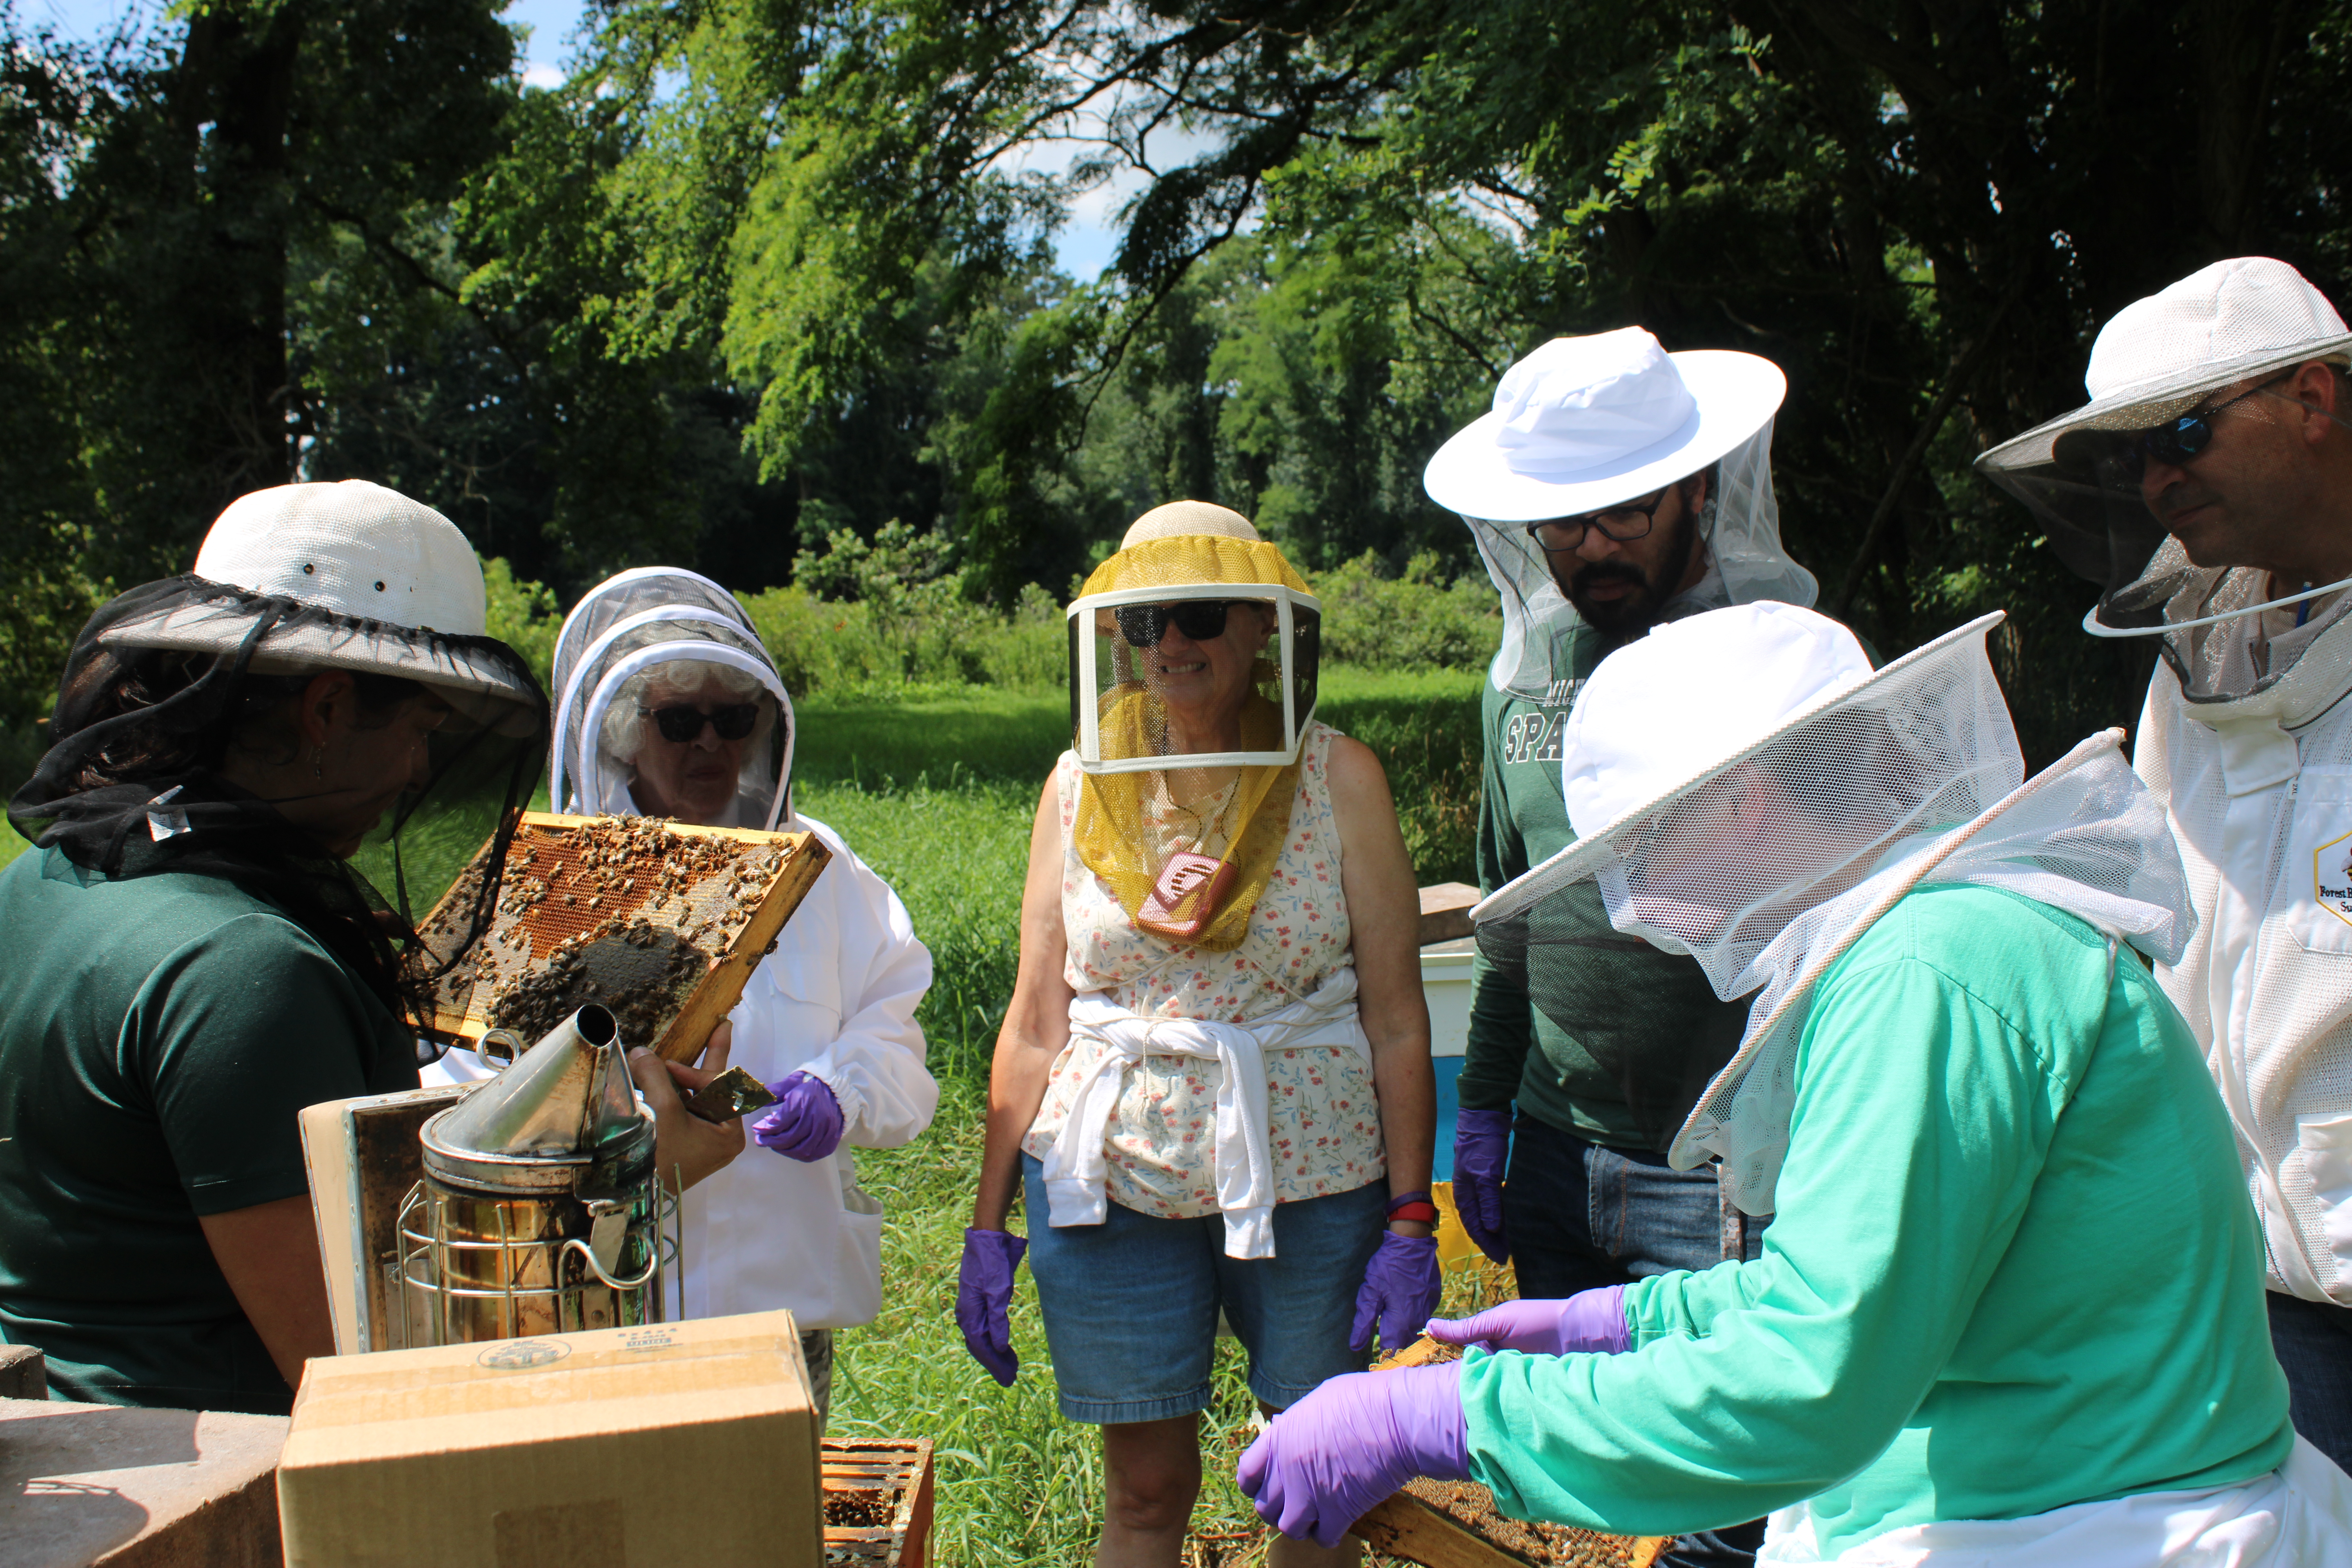 2021 Needs assessment of Michigan small-scale beekeepers